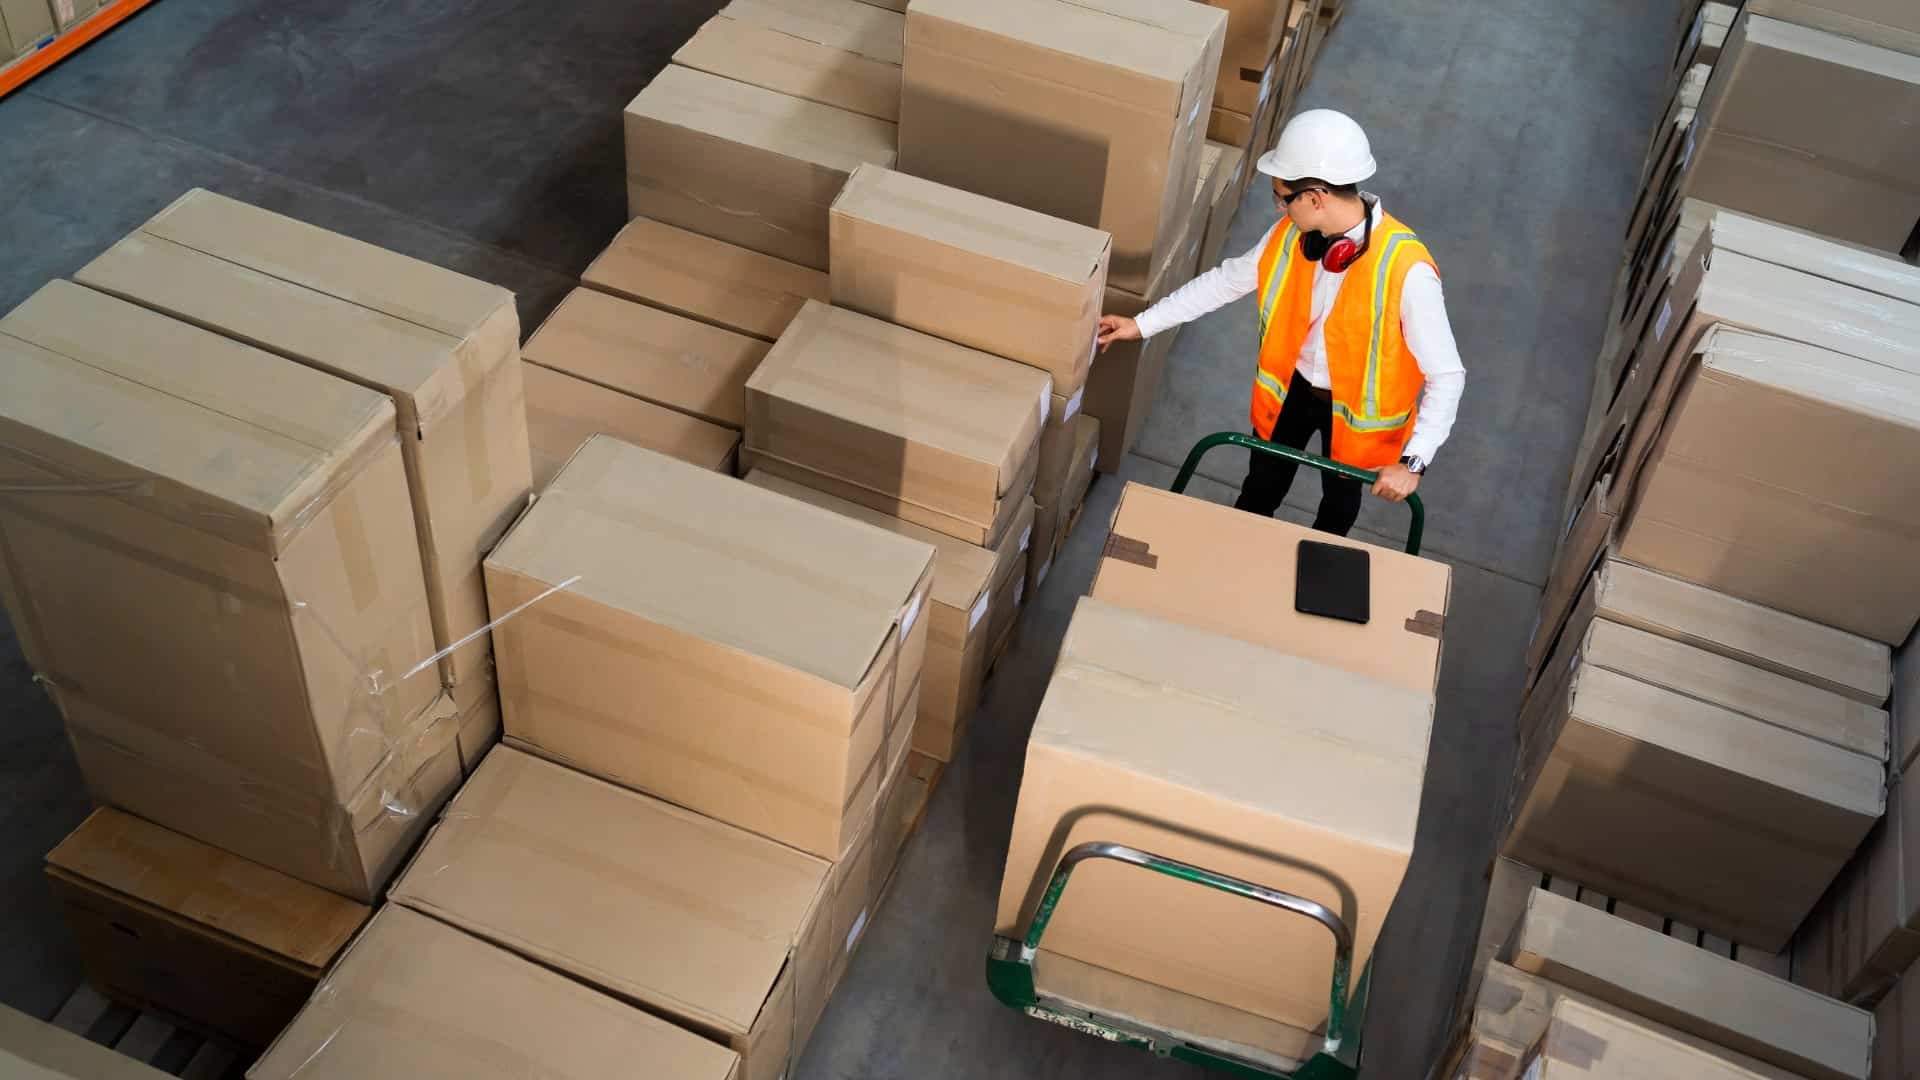 How Much Does it Cost to Start a Logistics Company in UAE